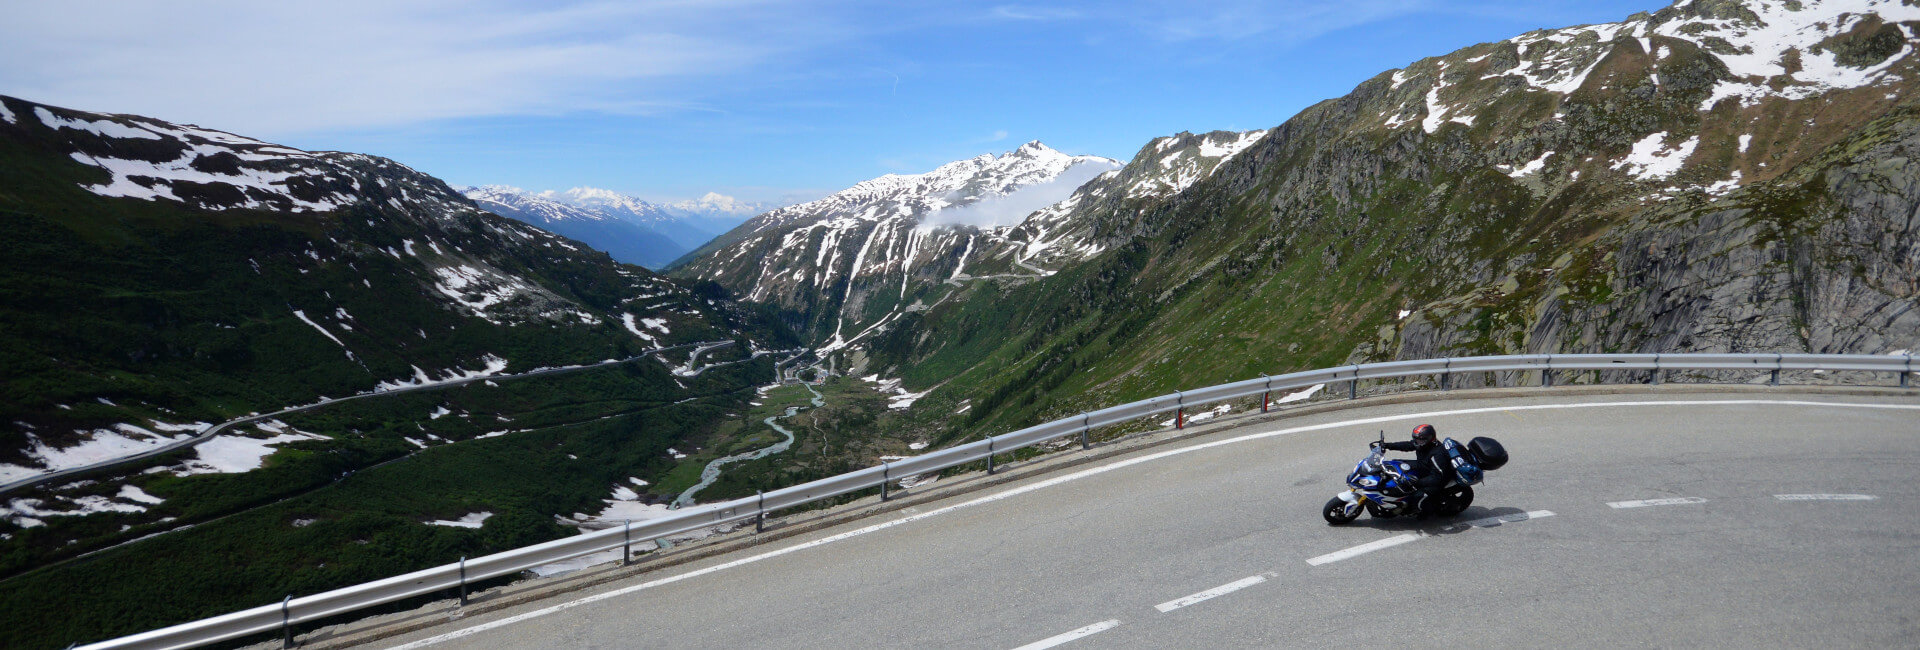 Motorcyclist riding with alps in the distance.